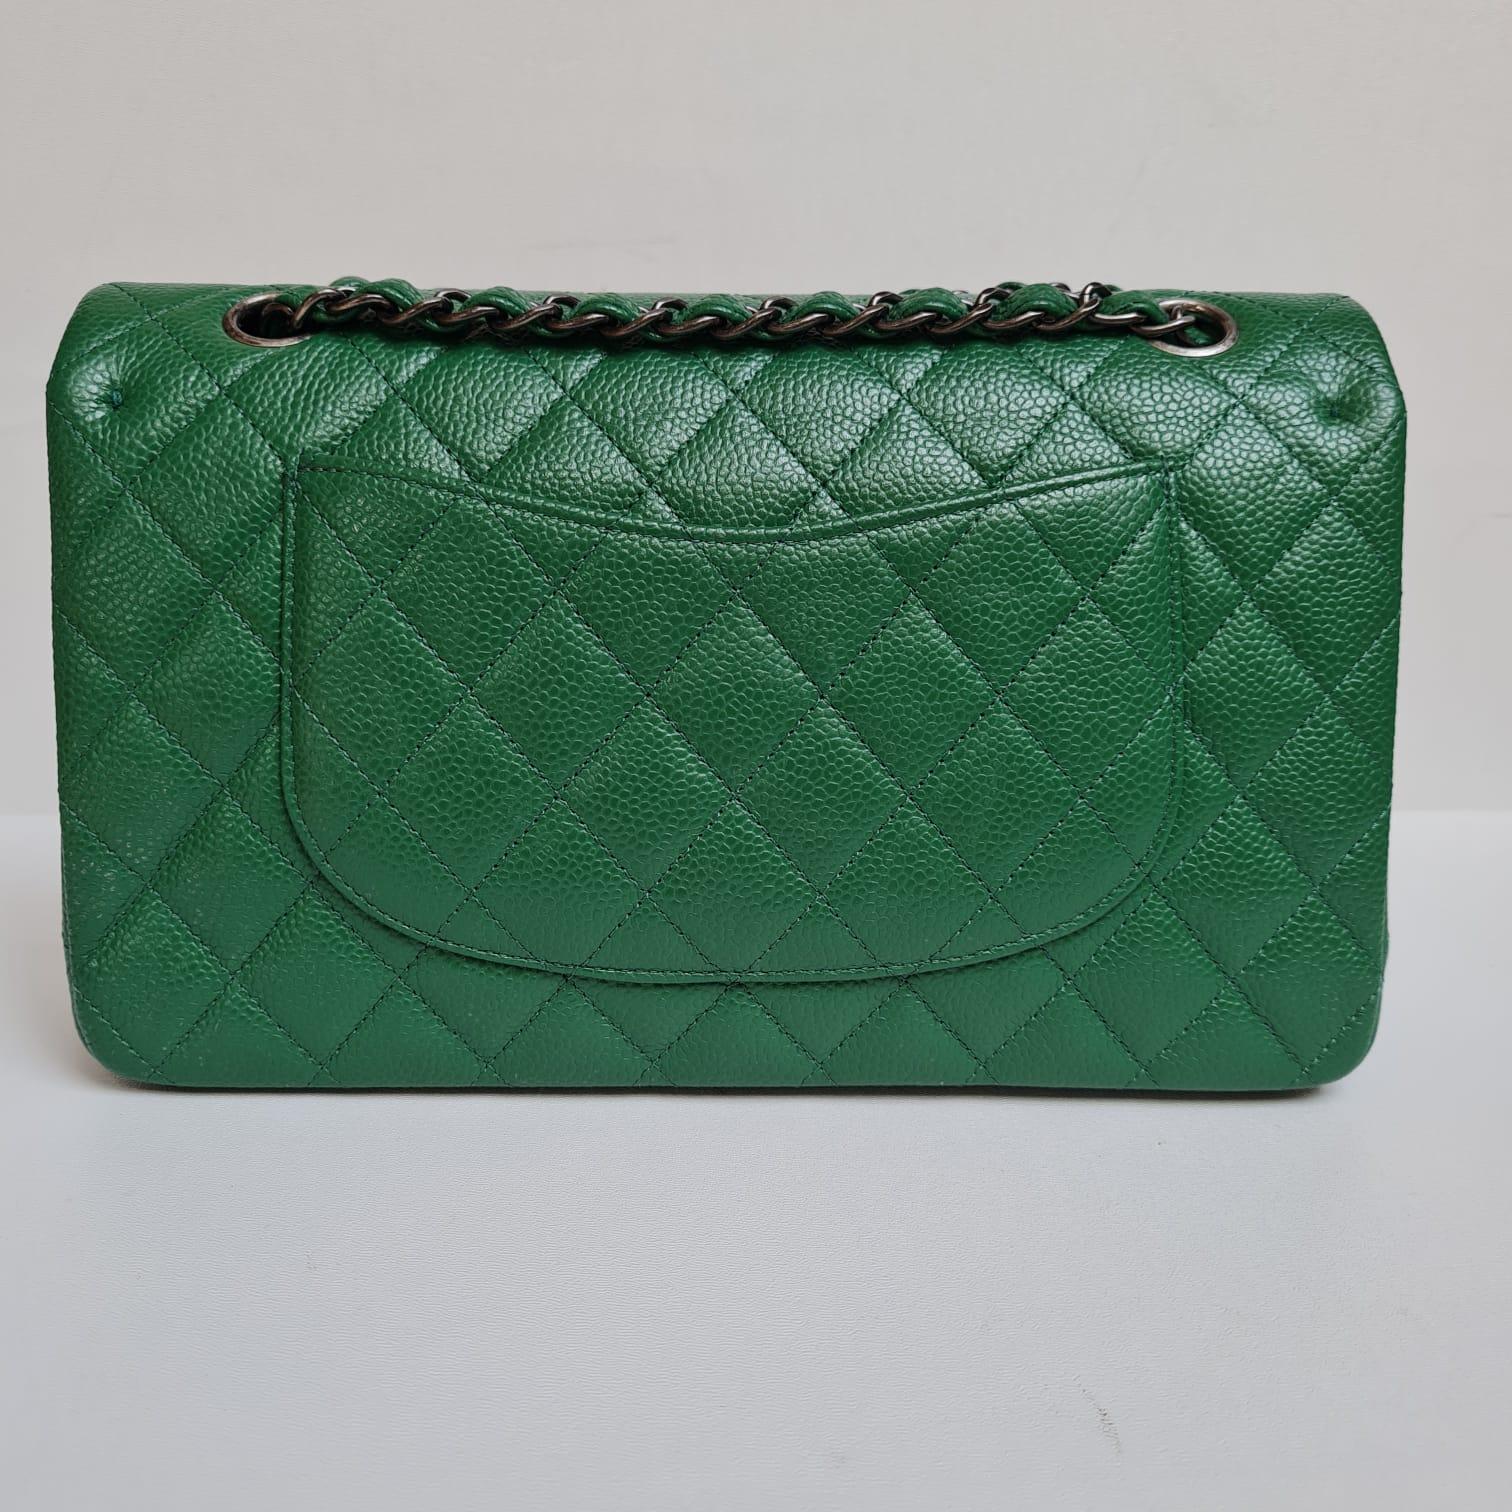 Rare Chanel Emerald Green Caviar Quilted Classic Medium Double Flap Bag RHW 13